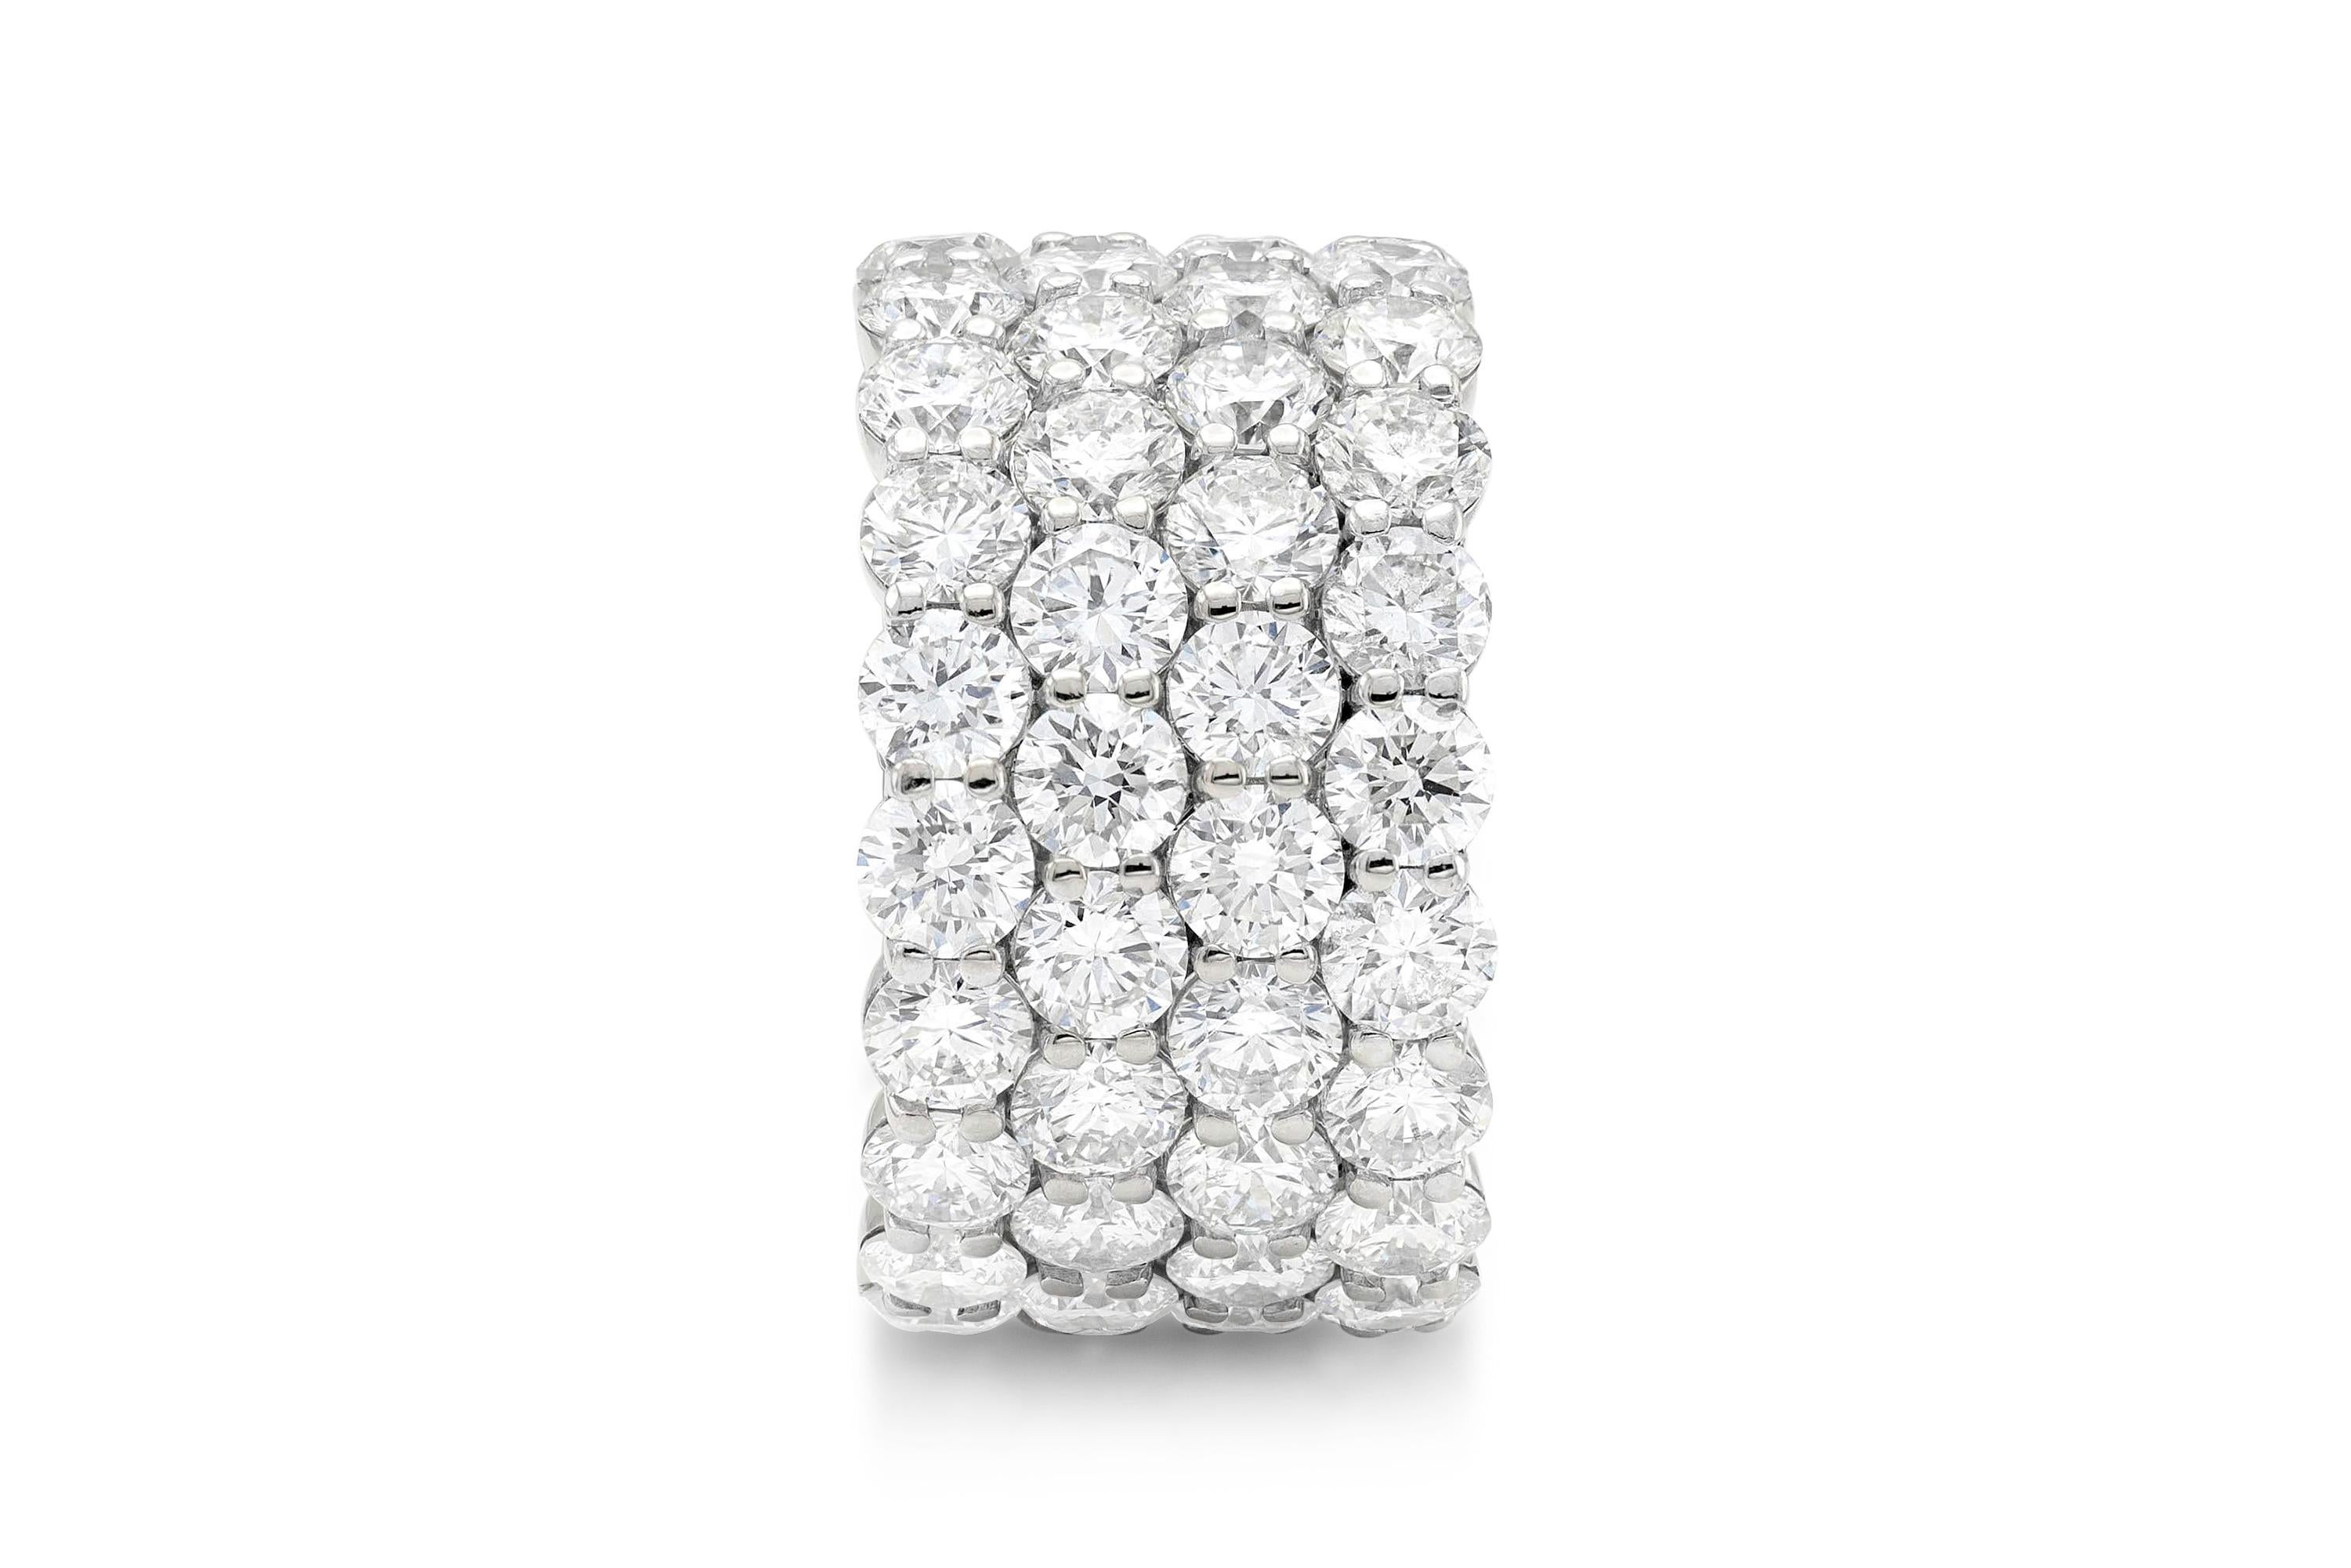 Finely crafted in platinum with 4 rows of round brilliant cut diamonds weighing approximately a total of 11.40 carats.
E-F color, VVS-VS clarity
Size 5 1/4